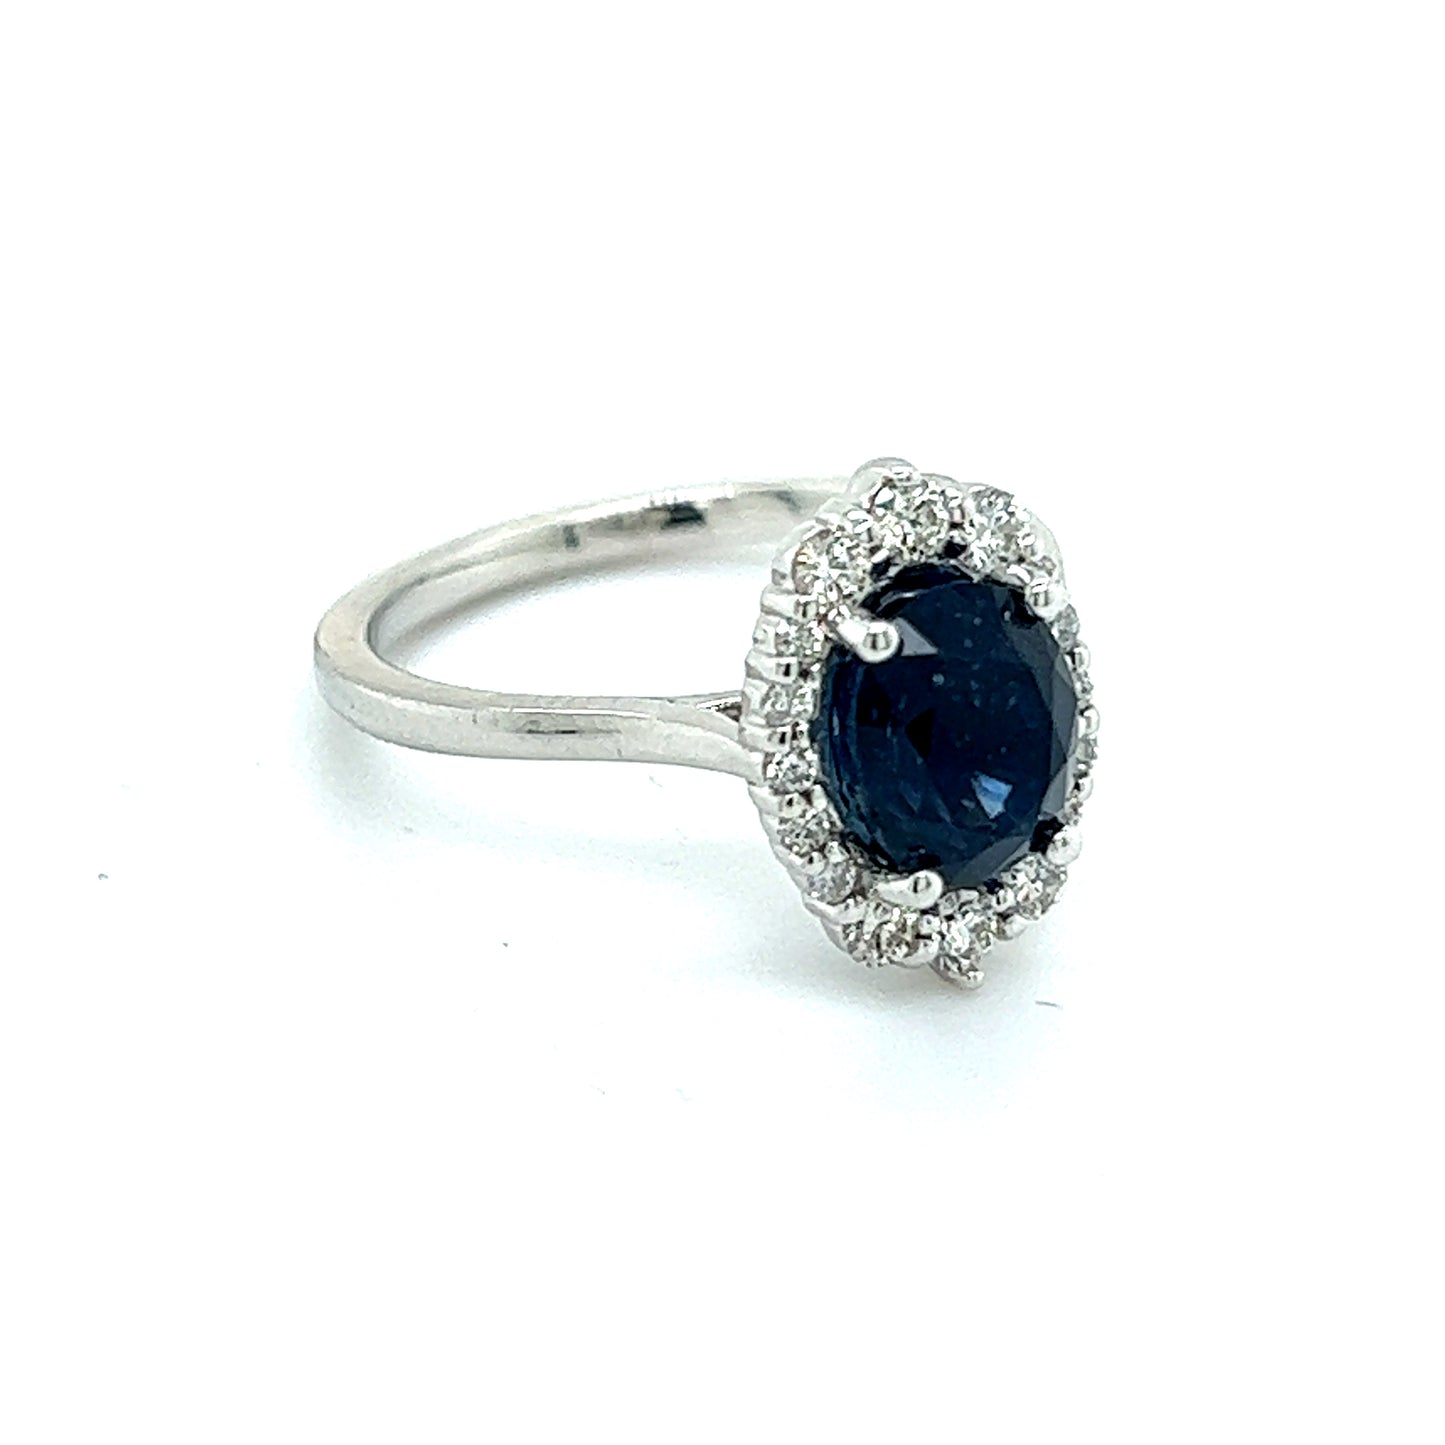 Natural Sapphire Diamond Ring Size 6.5 14k W Gold 2.29 TCW Certified $2,850 216681